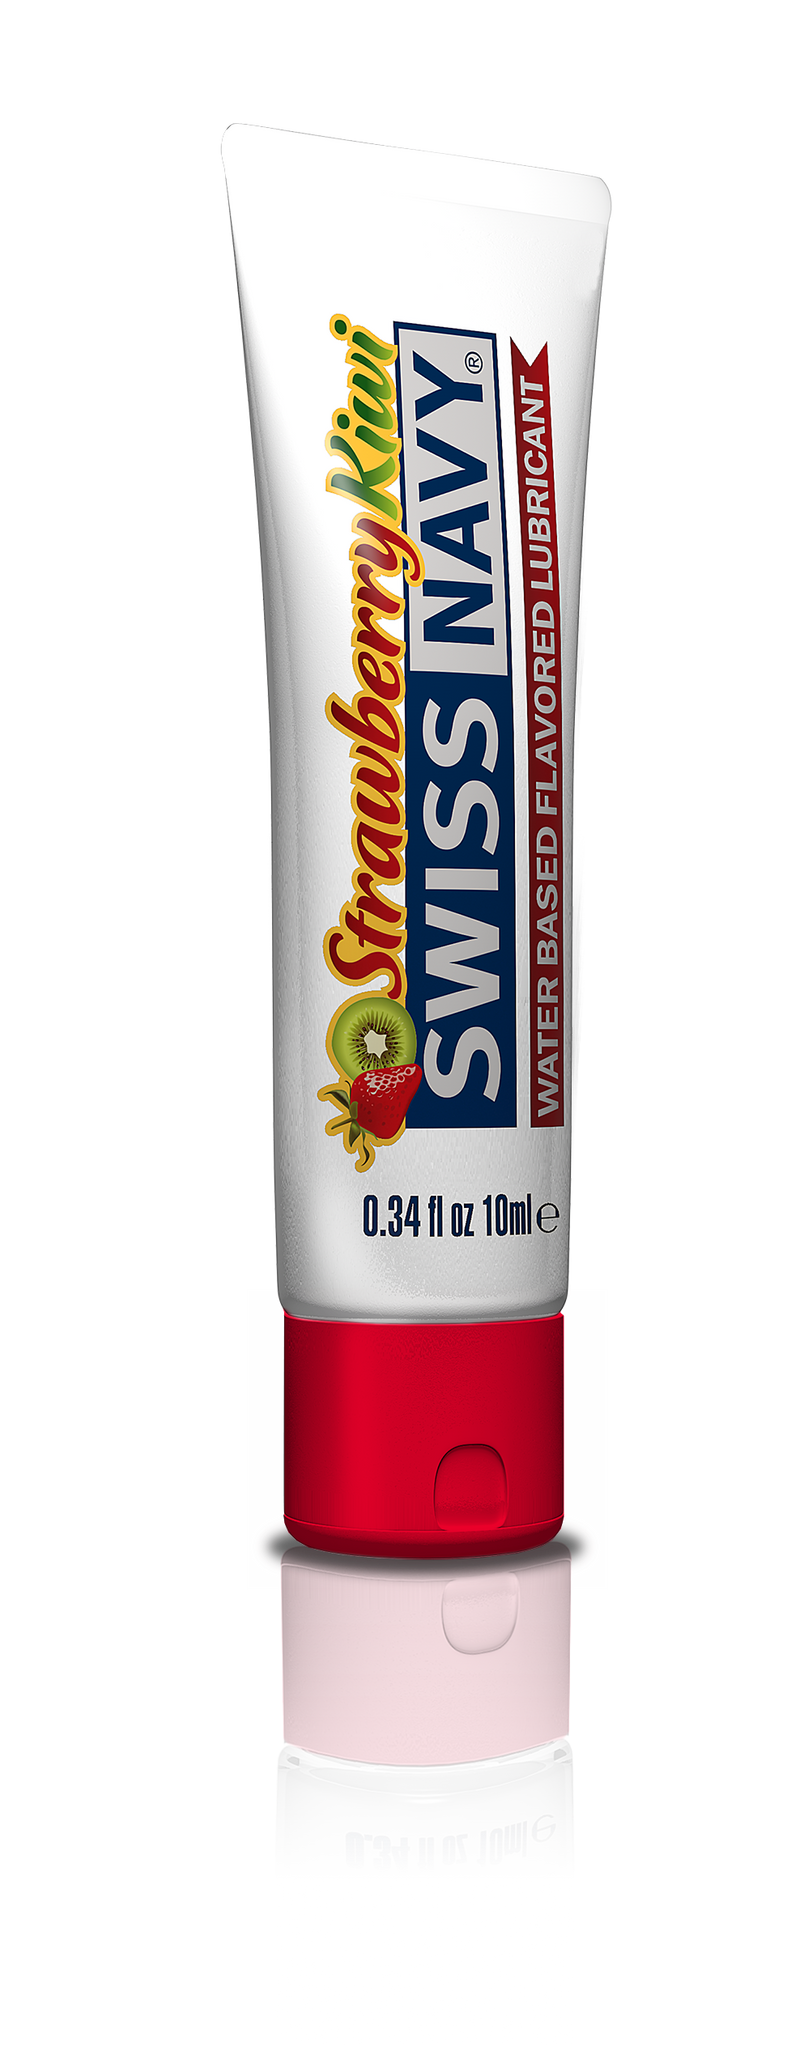 MD Science Swiss Navy Strawberry Kiwi Flavored Lubricant 10ml at $3.99